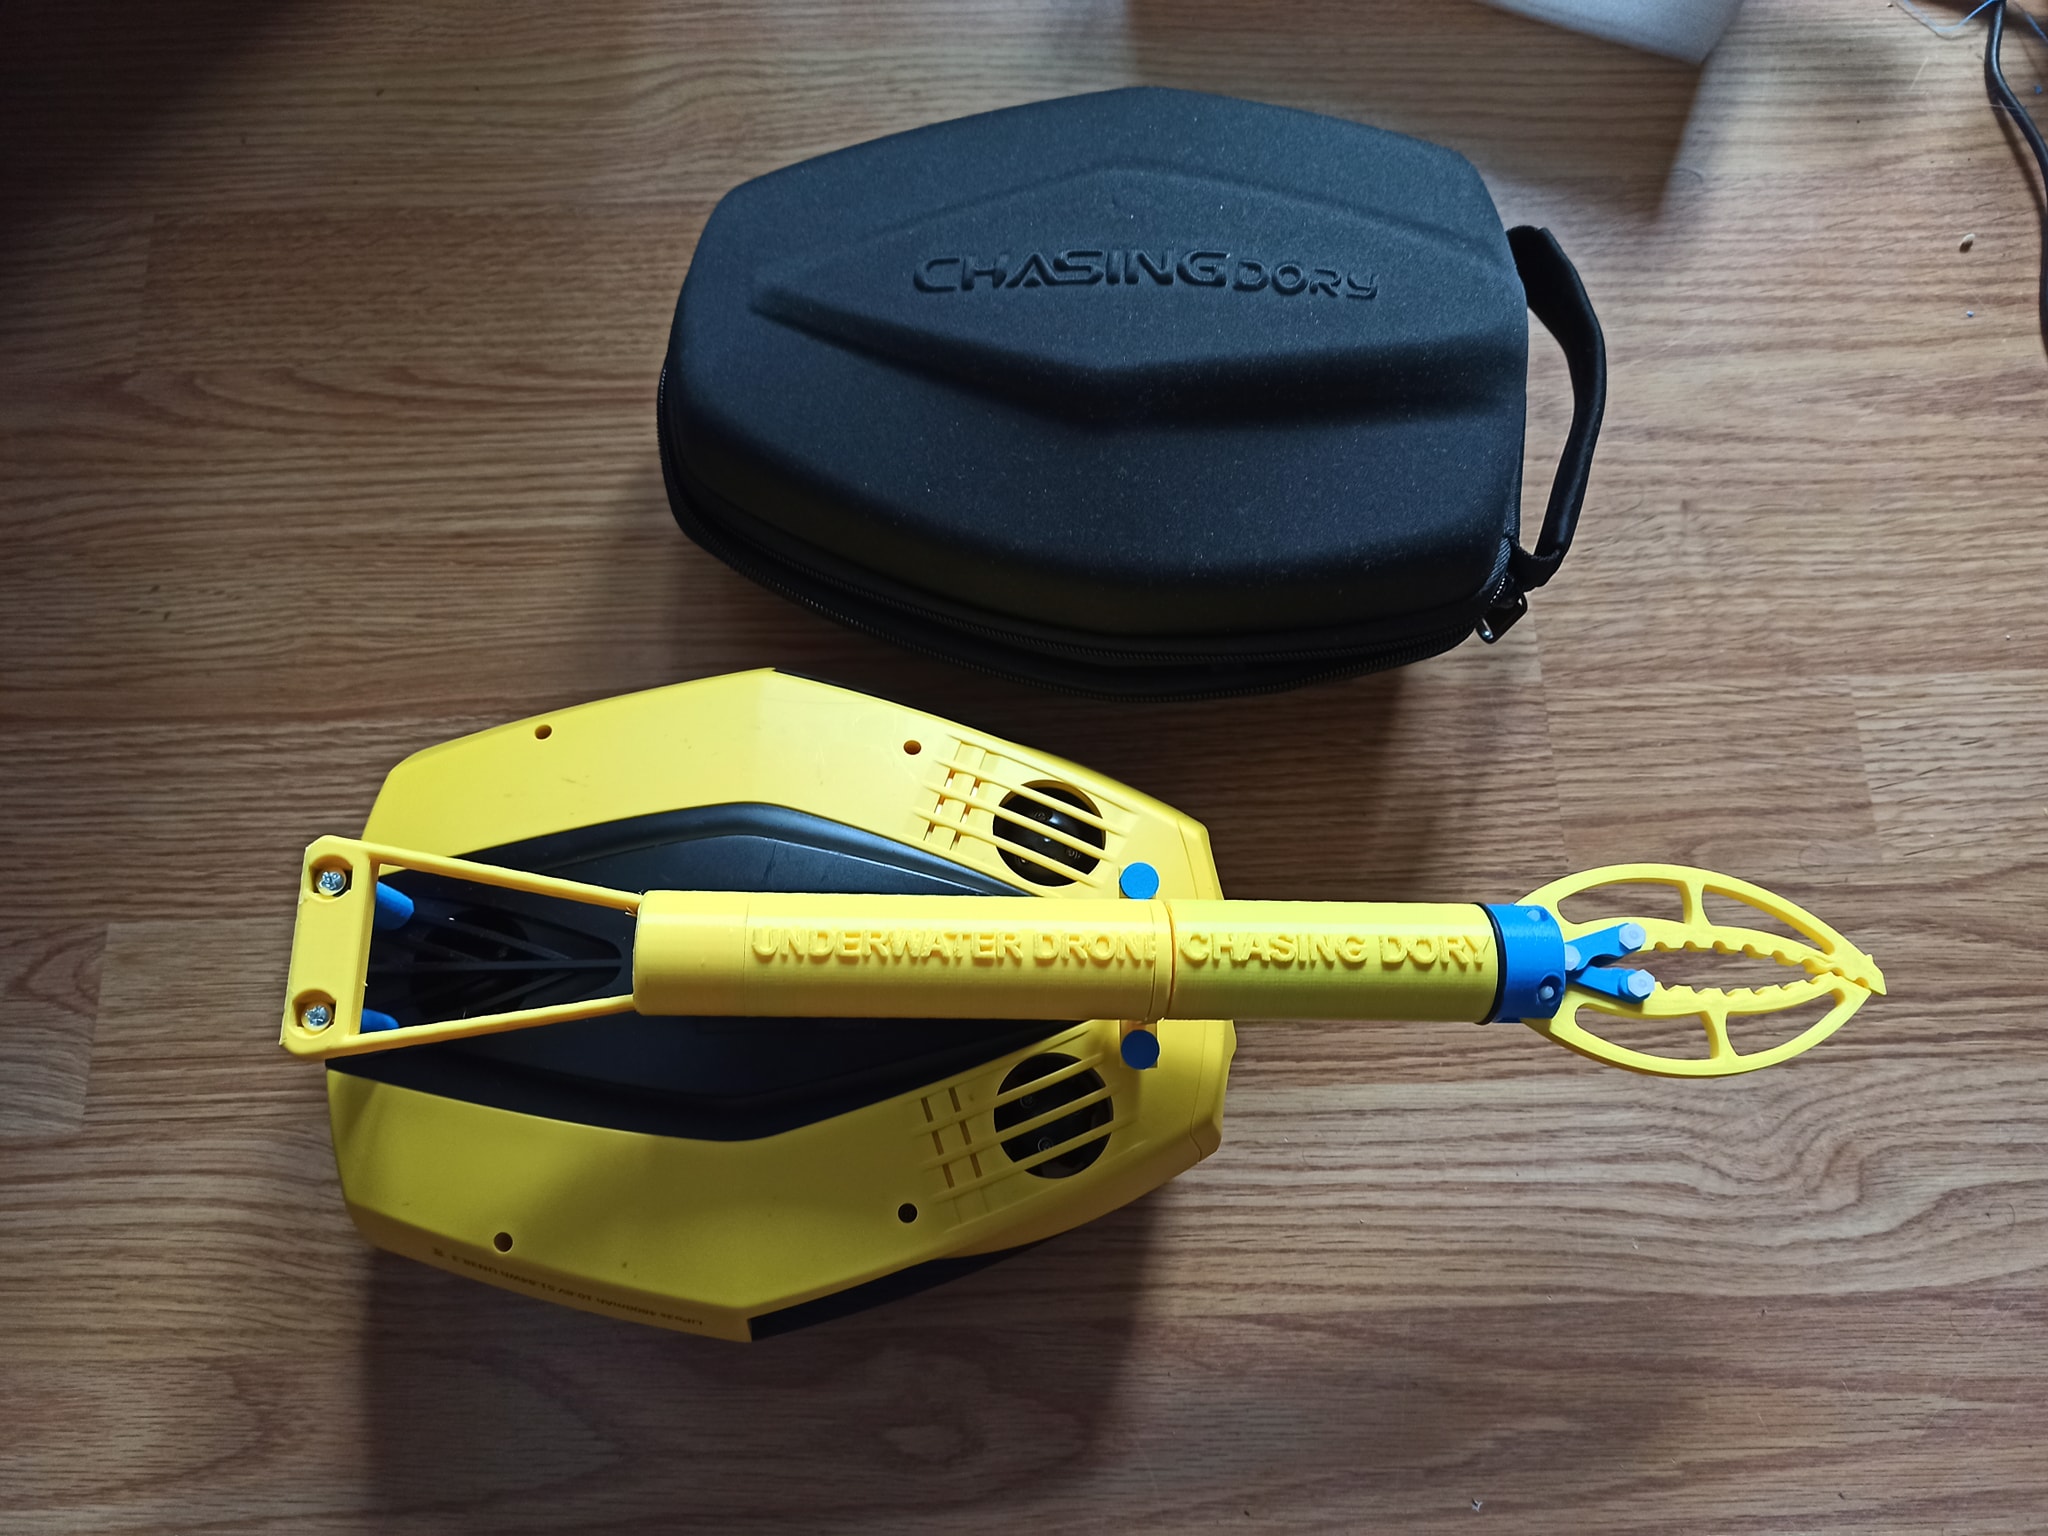 robotic-arm-claw-chasing-dory-underwater-drone.jpg